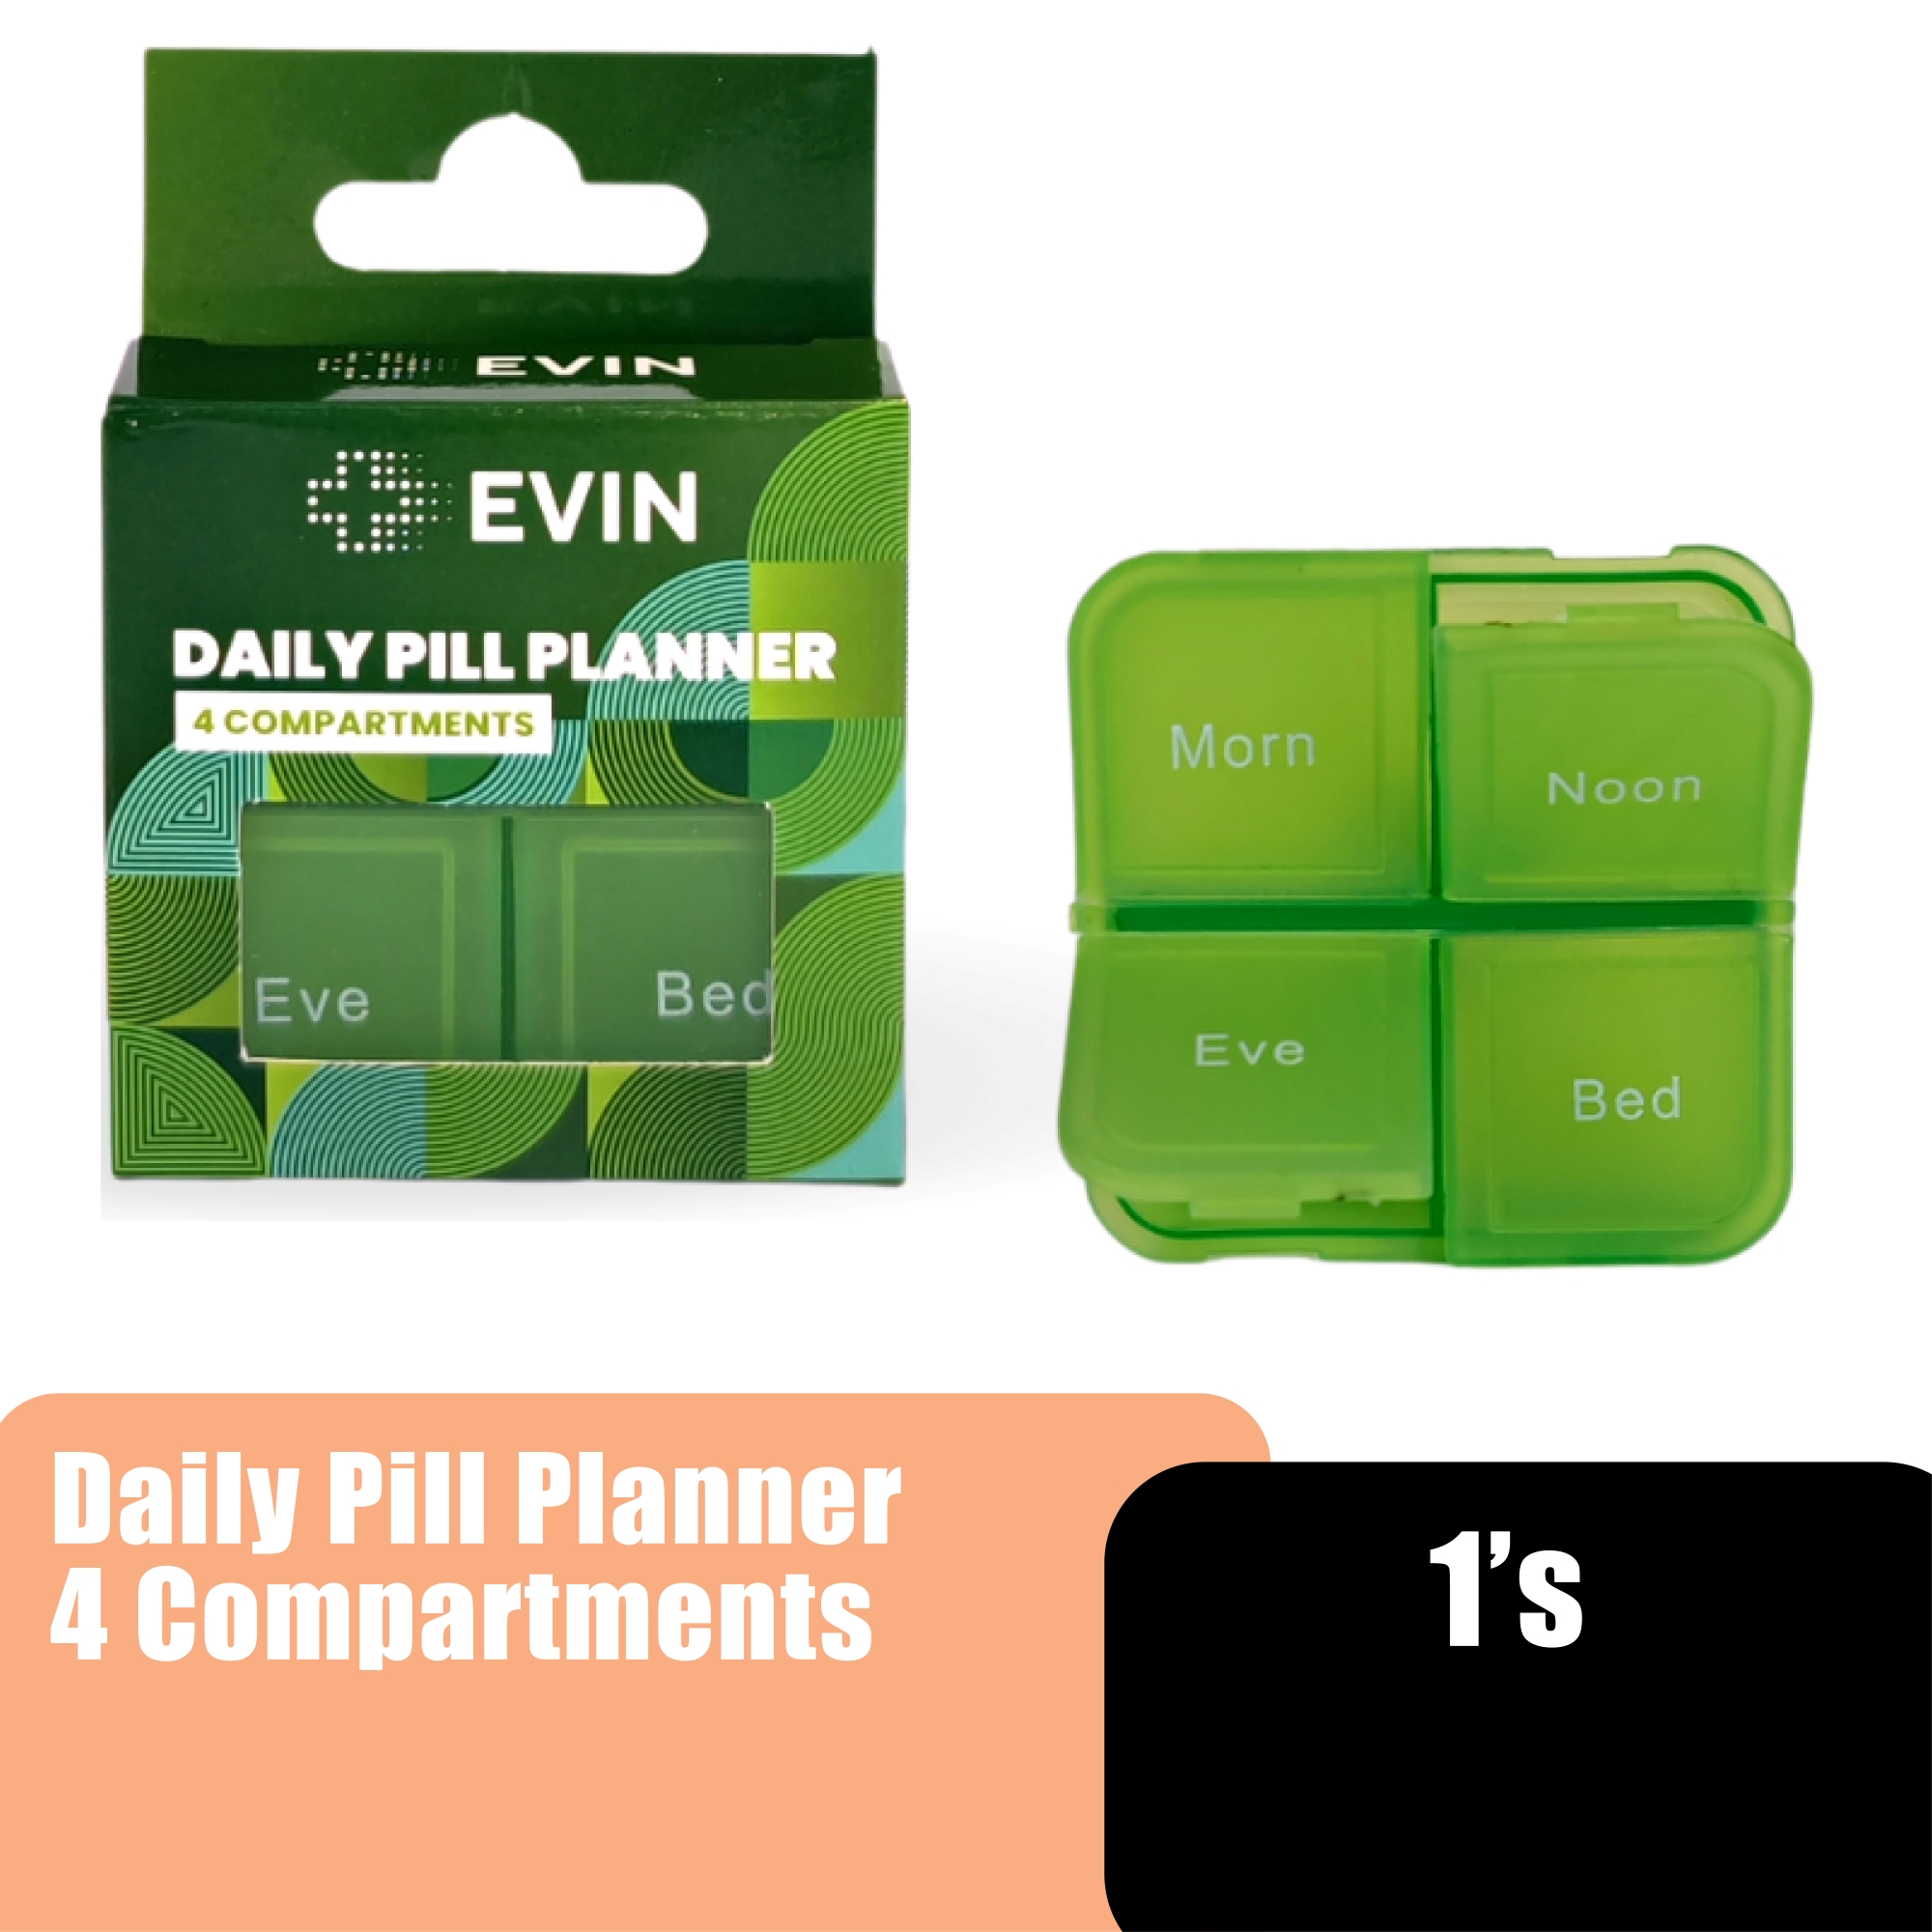 EVIN DAILY PILL PLANNER 4 COMPARTMENTS